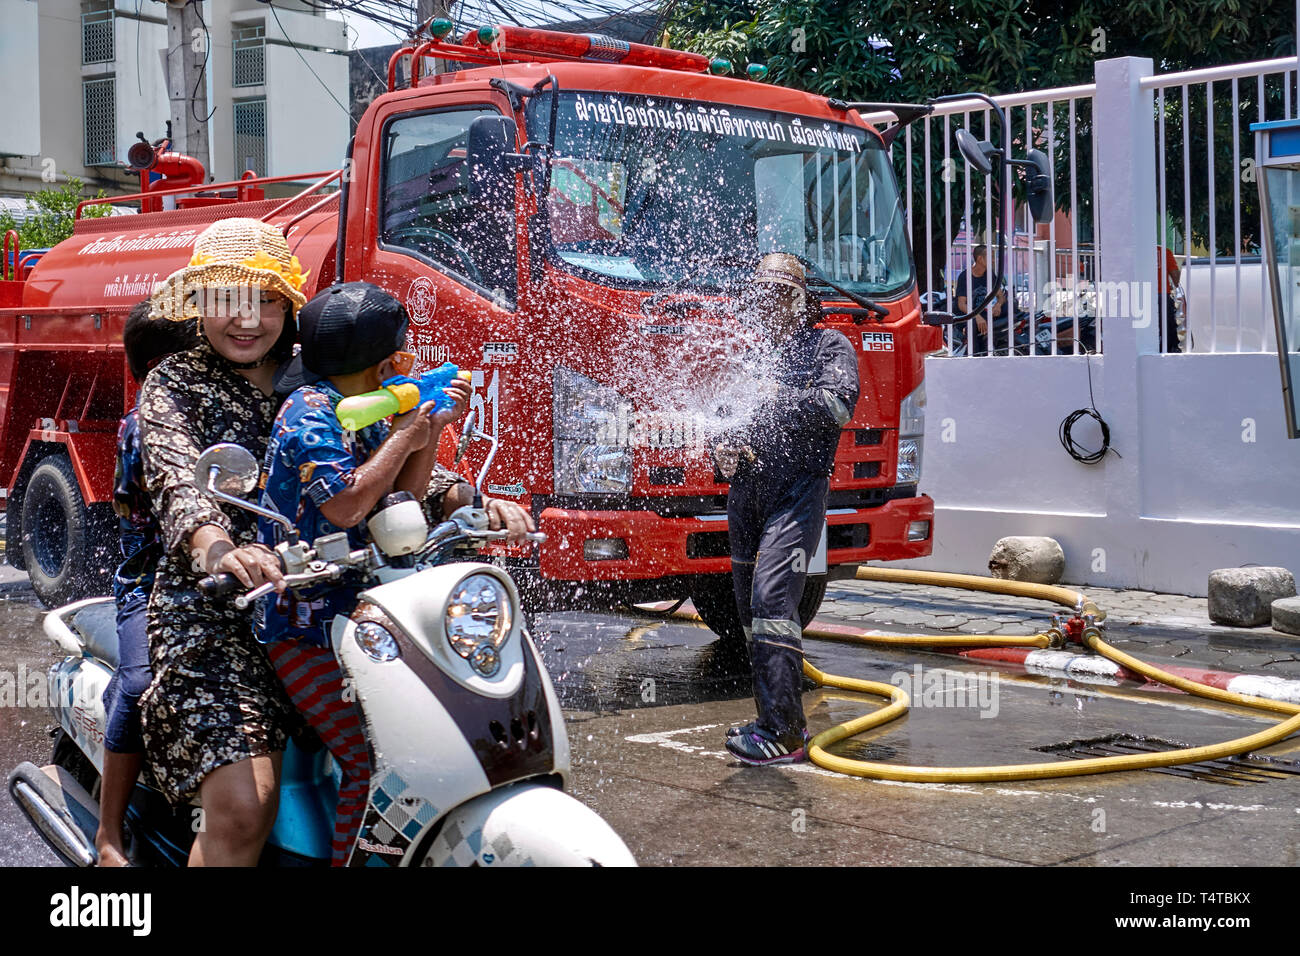 Songkran Thailand New Year and water festival 2019 with a young boy clearly outgunned by the fireman and his fire truck. Stock Photo